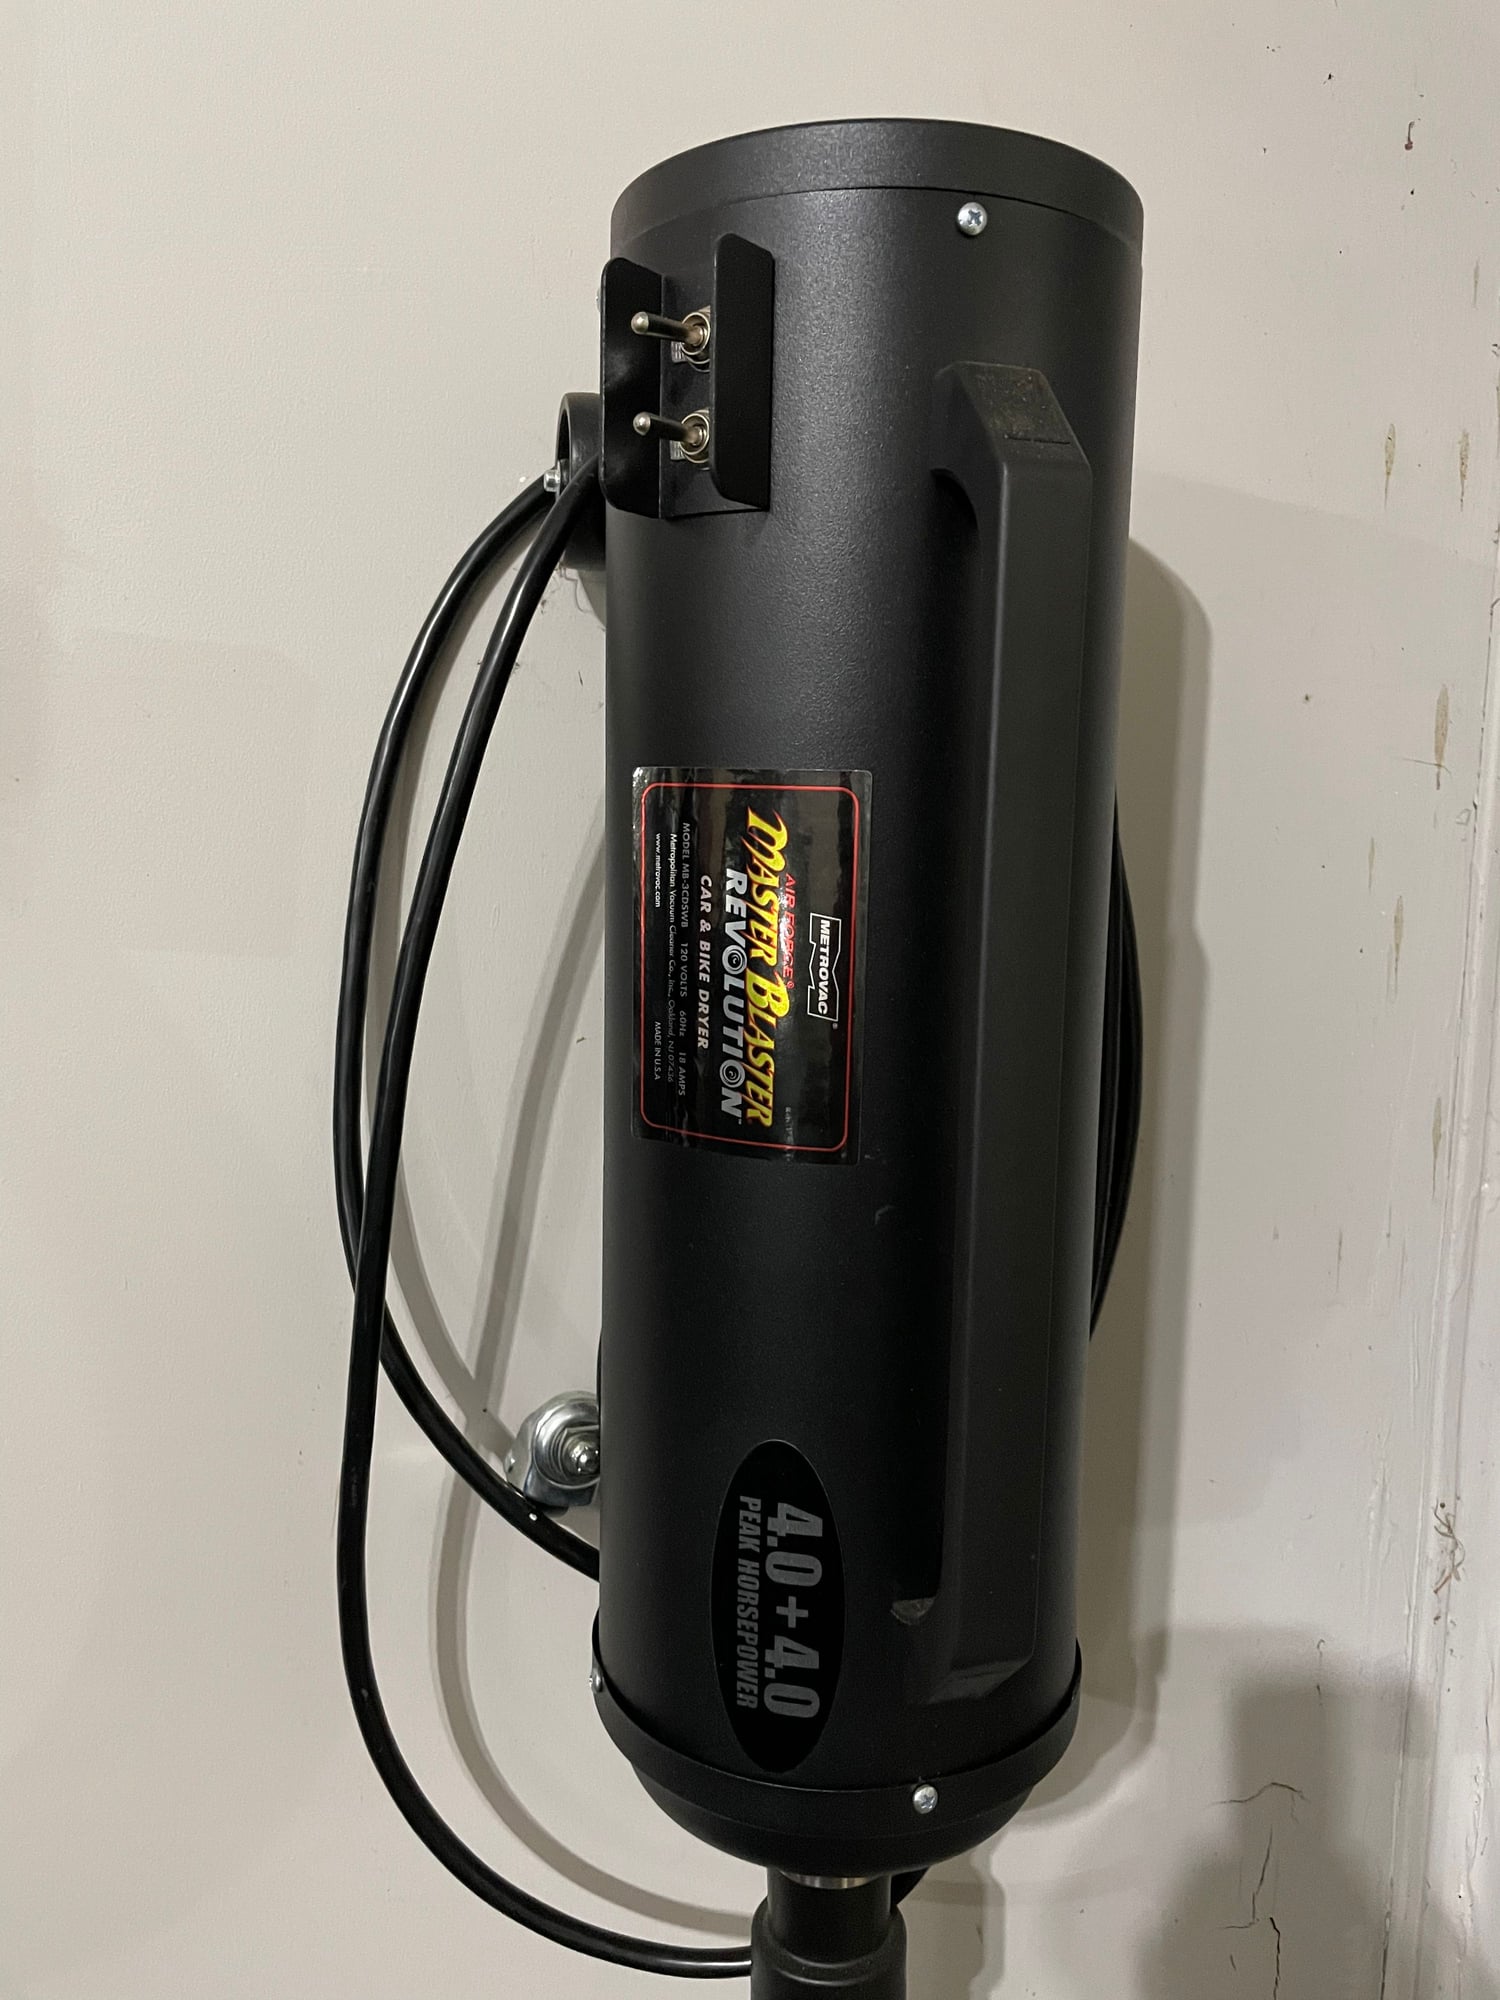 Miscellaneous - FS: Metro Air Force Master Blaster Revolution Car Dryer 8 HP MB-3CDSWB-30 - Used - All Years Any Make All Models - Port Washington, NY 11050, United States